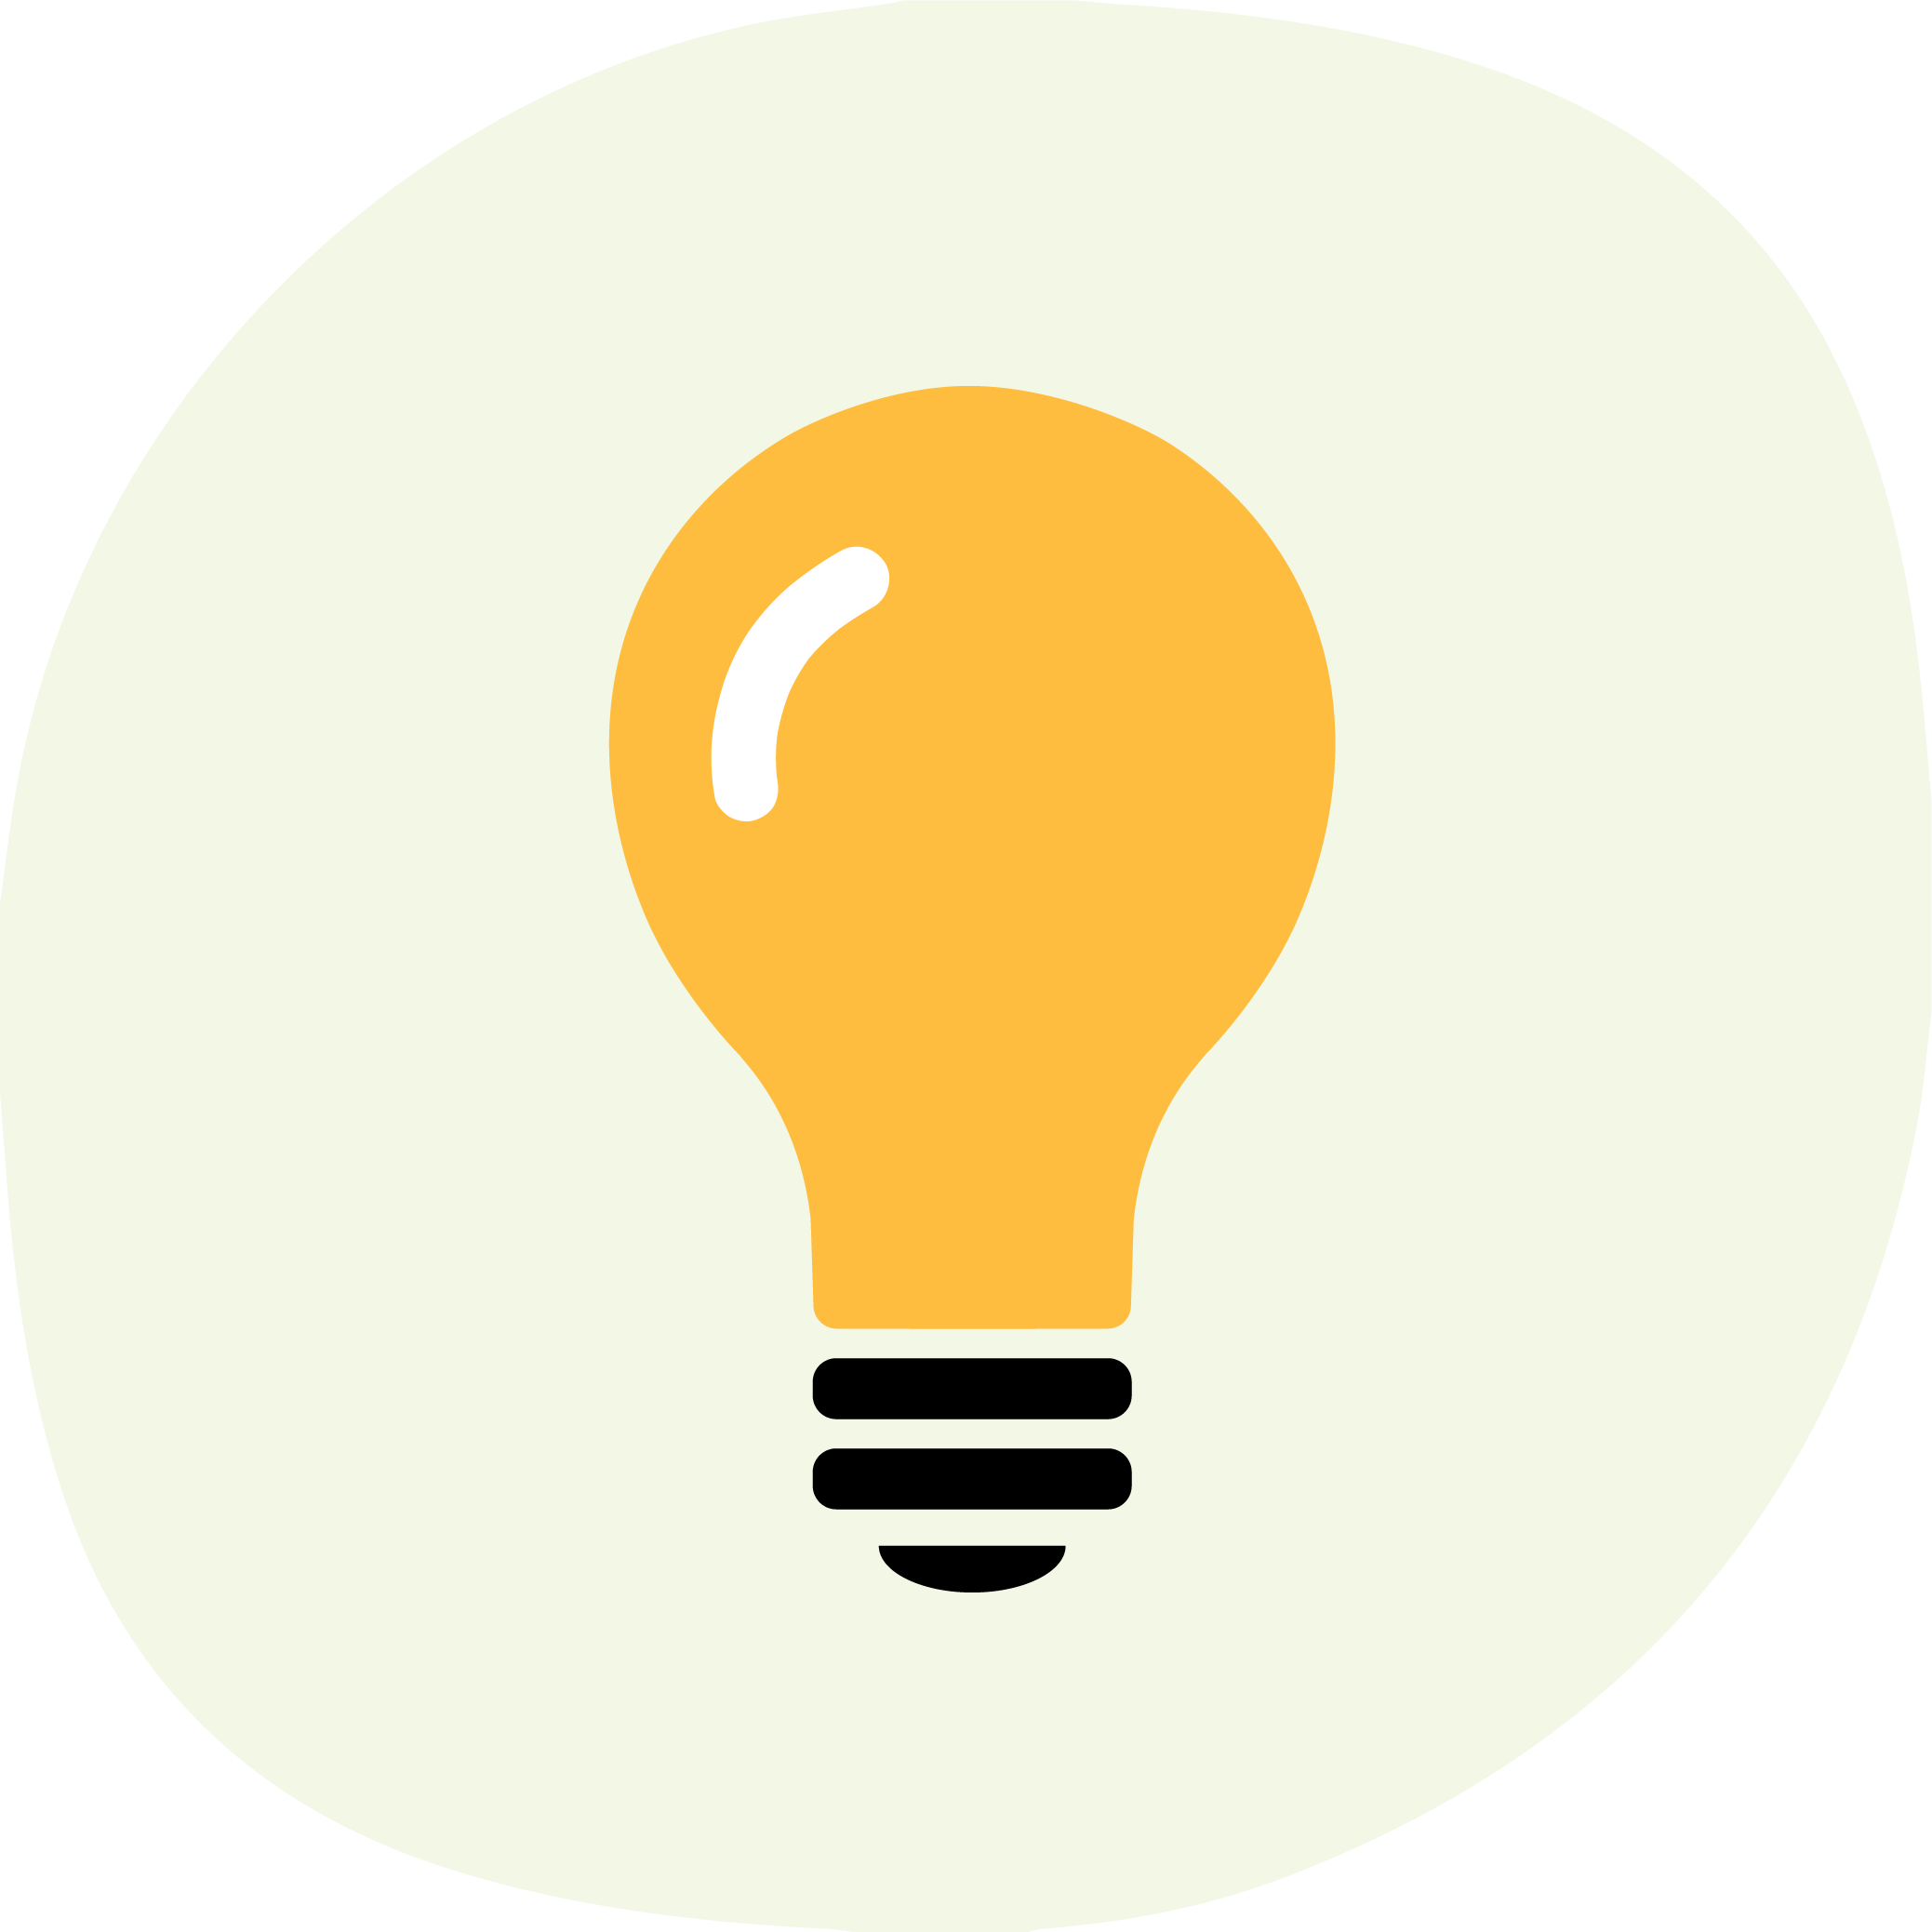 Yellow lightbulb icon with light green background.